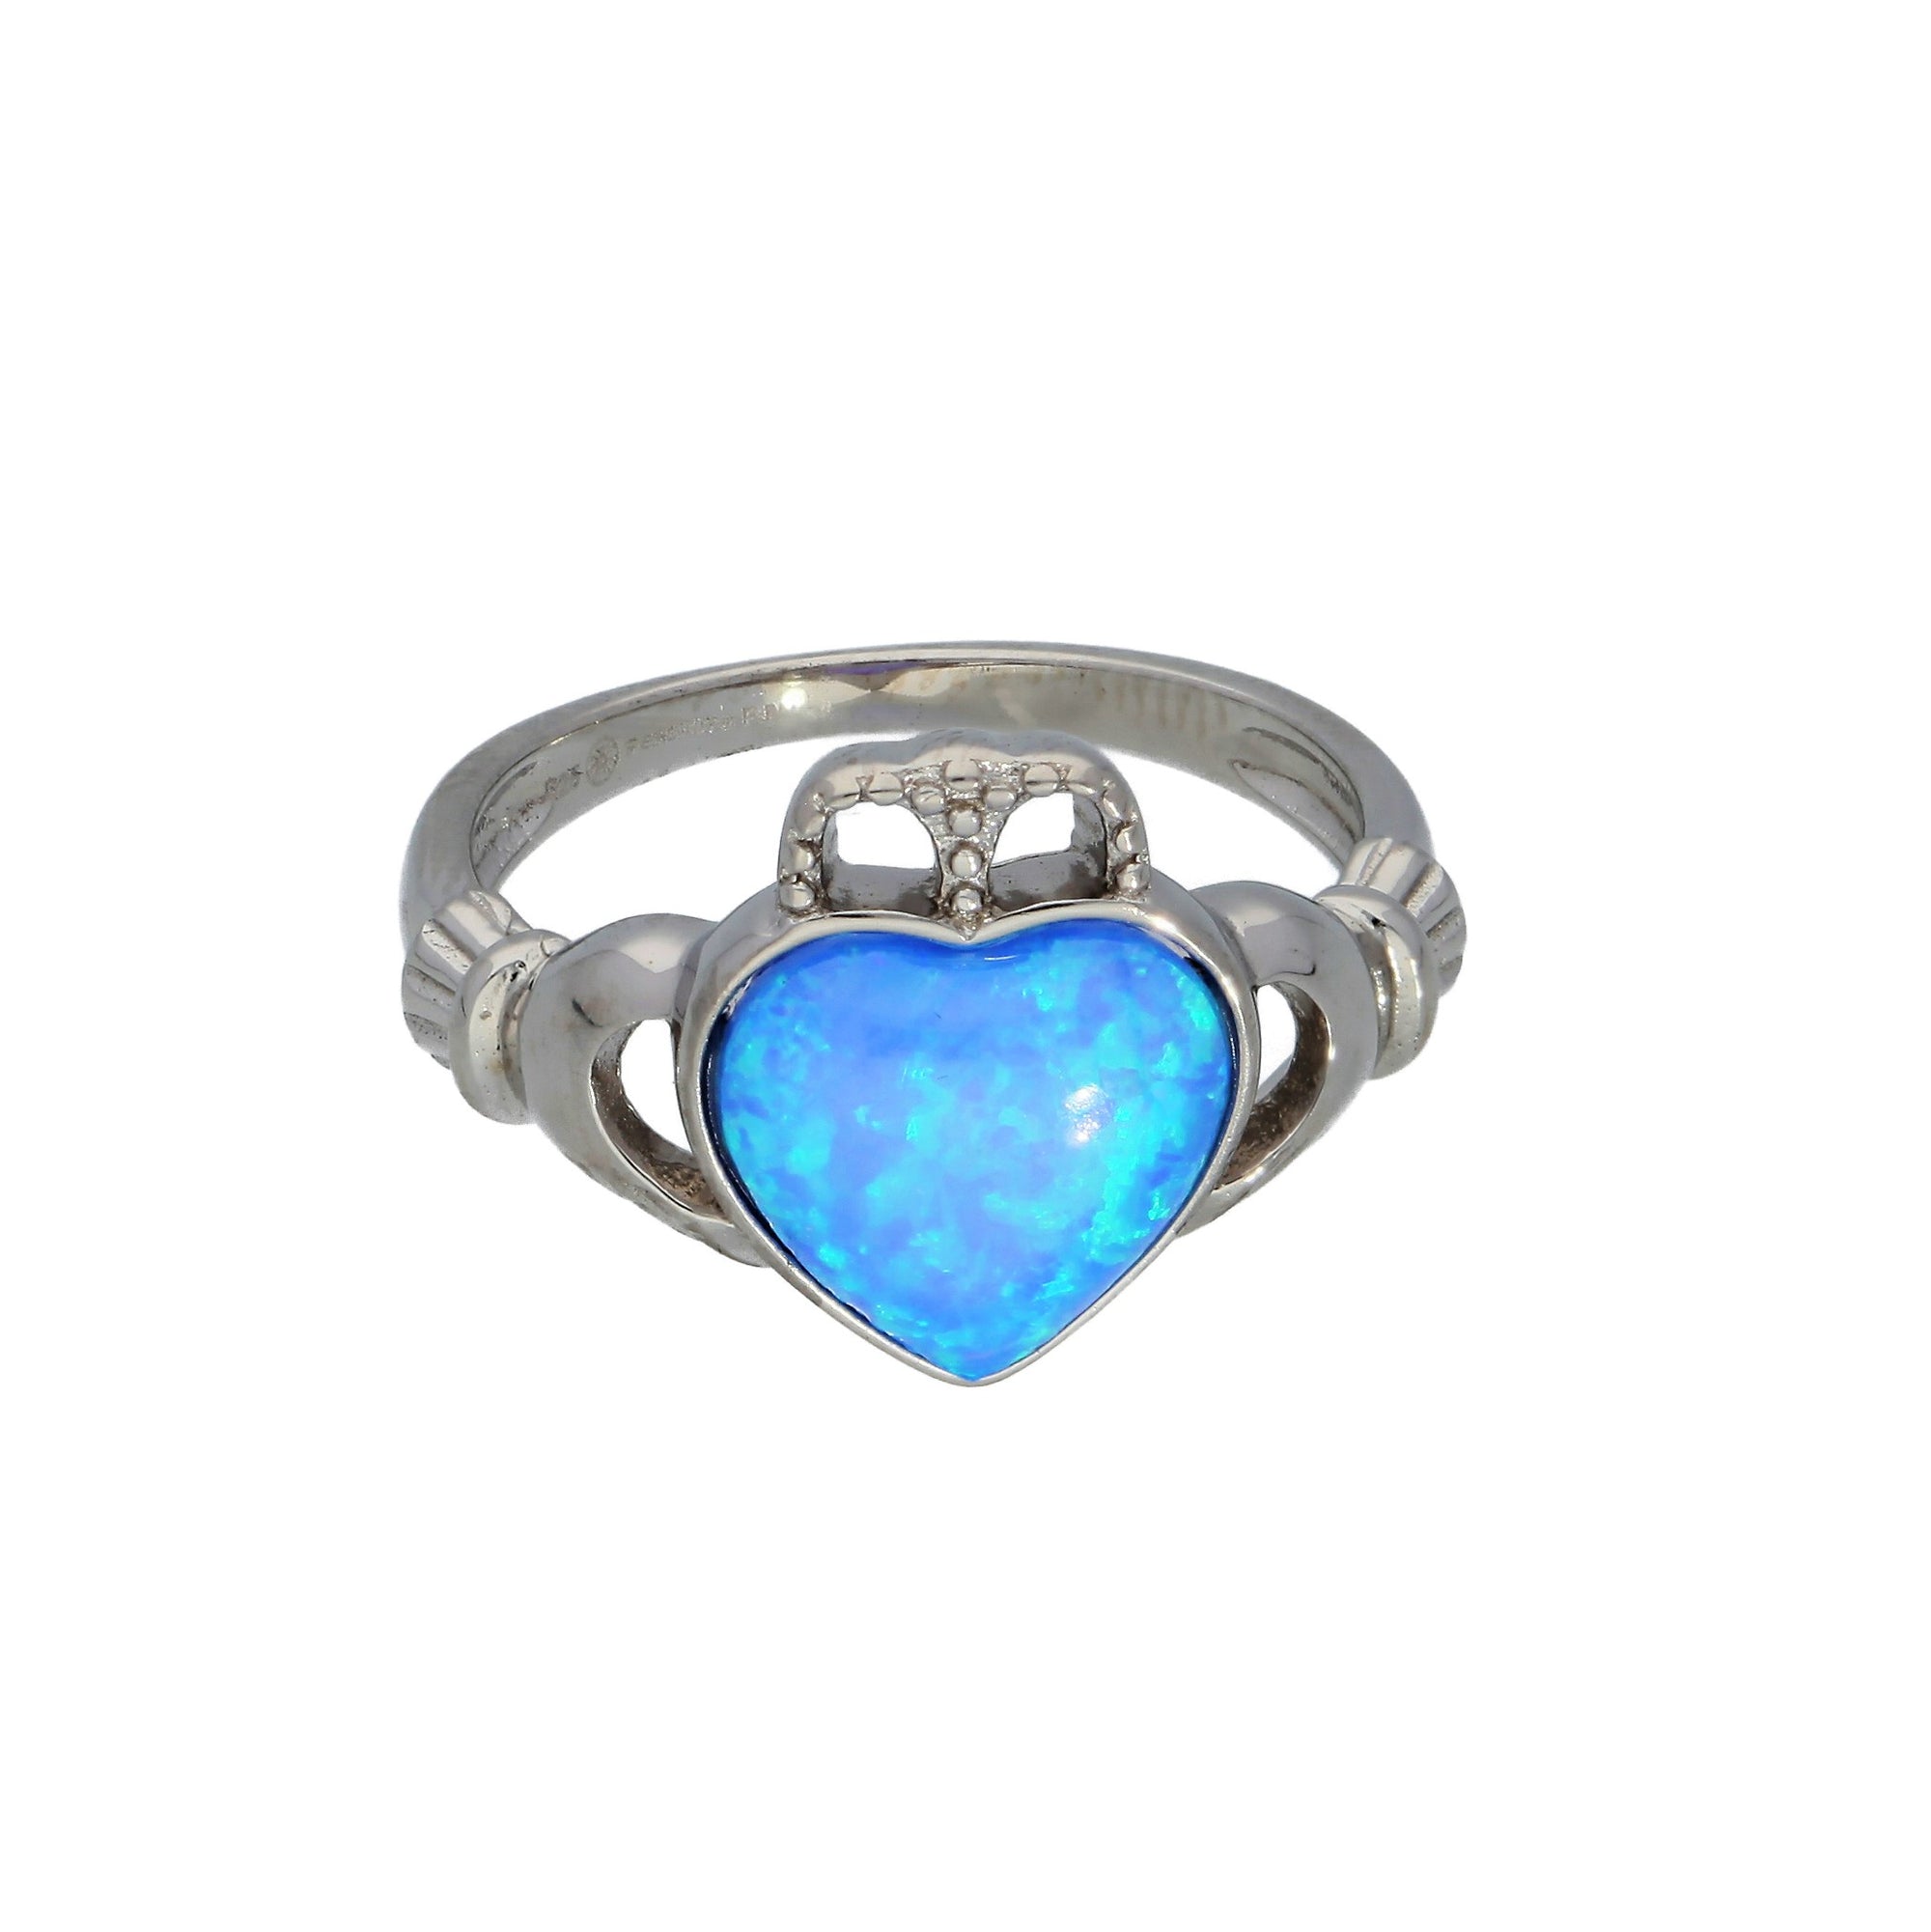 The Blue Heart Ring